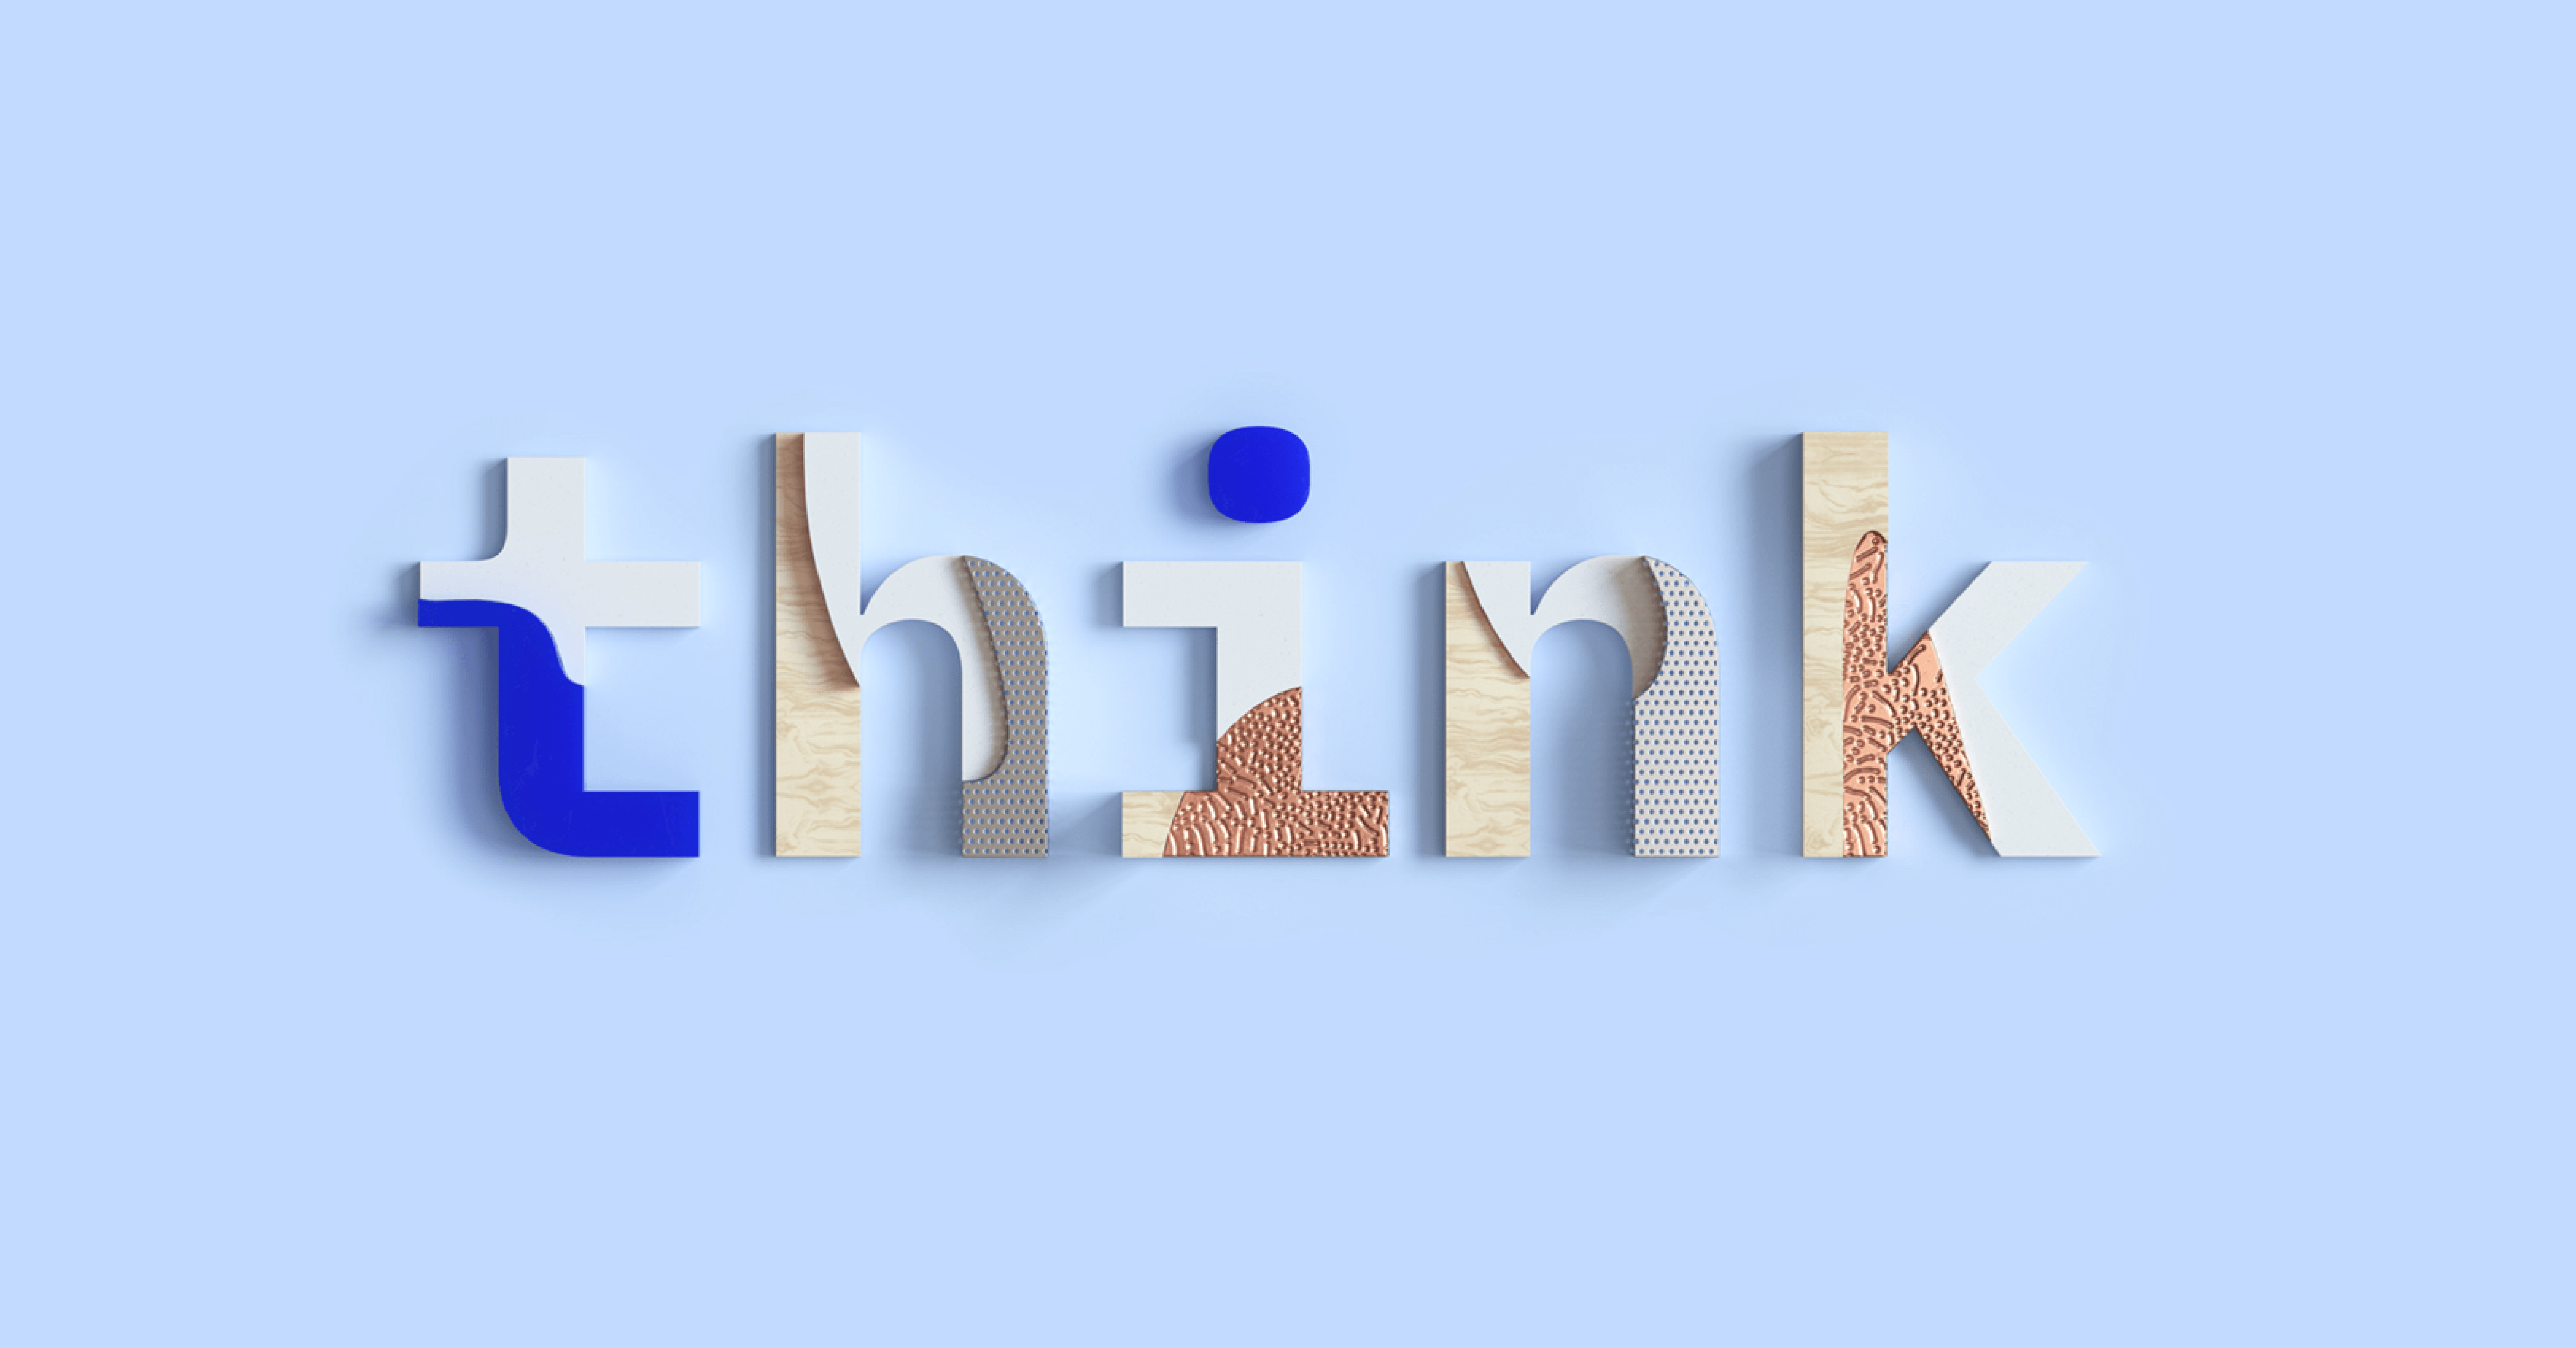 IBM Think Logo - Top 5 IBM Watson sessions to attend at Think 2018 - Watson